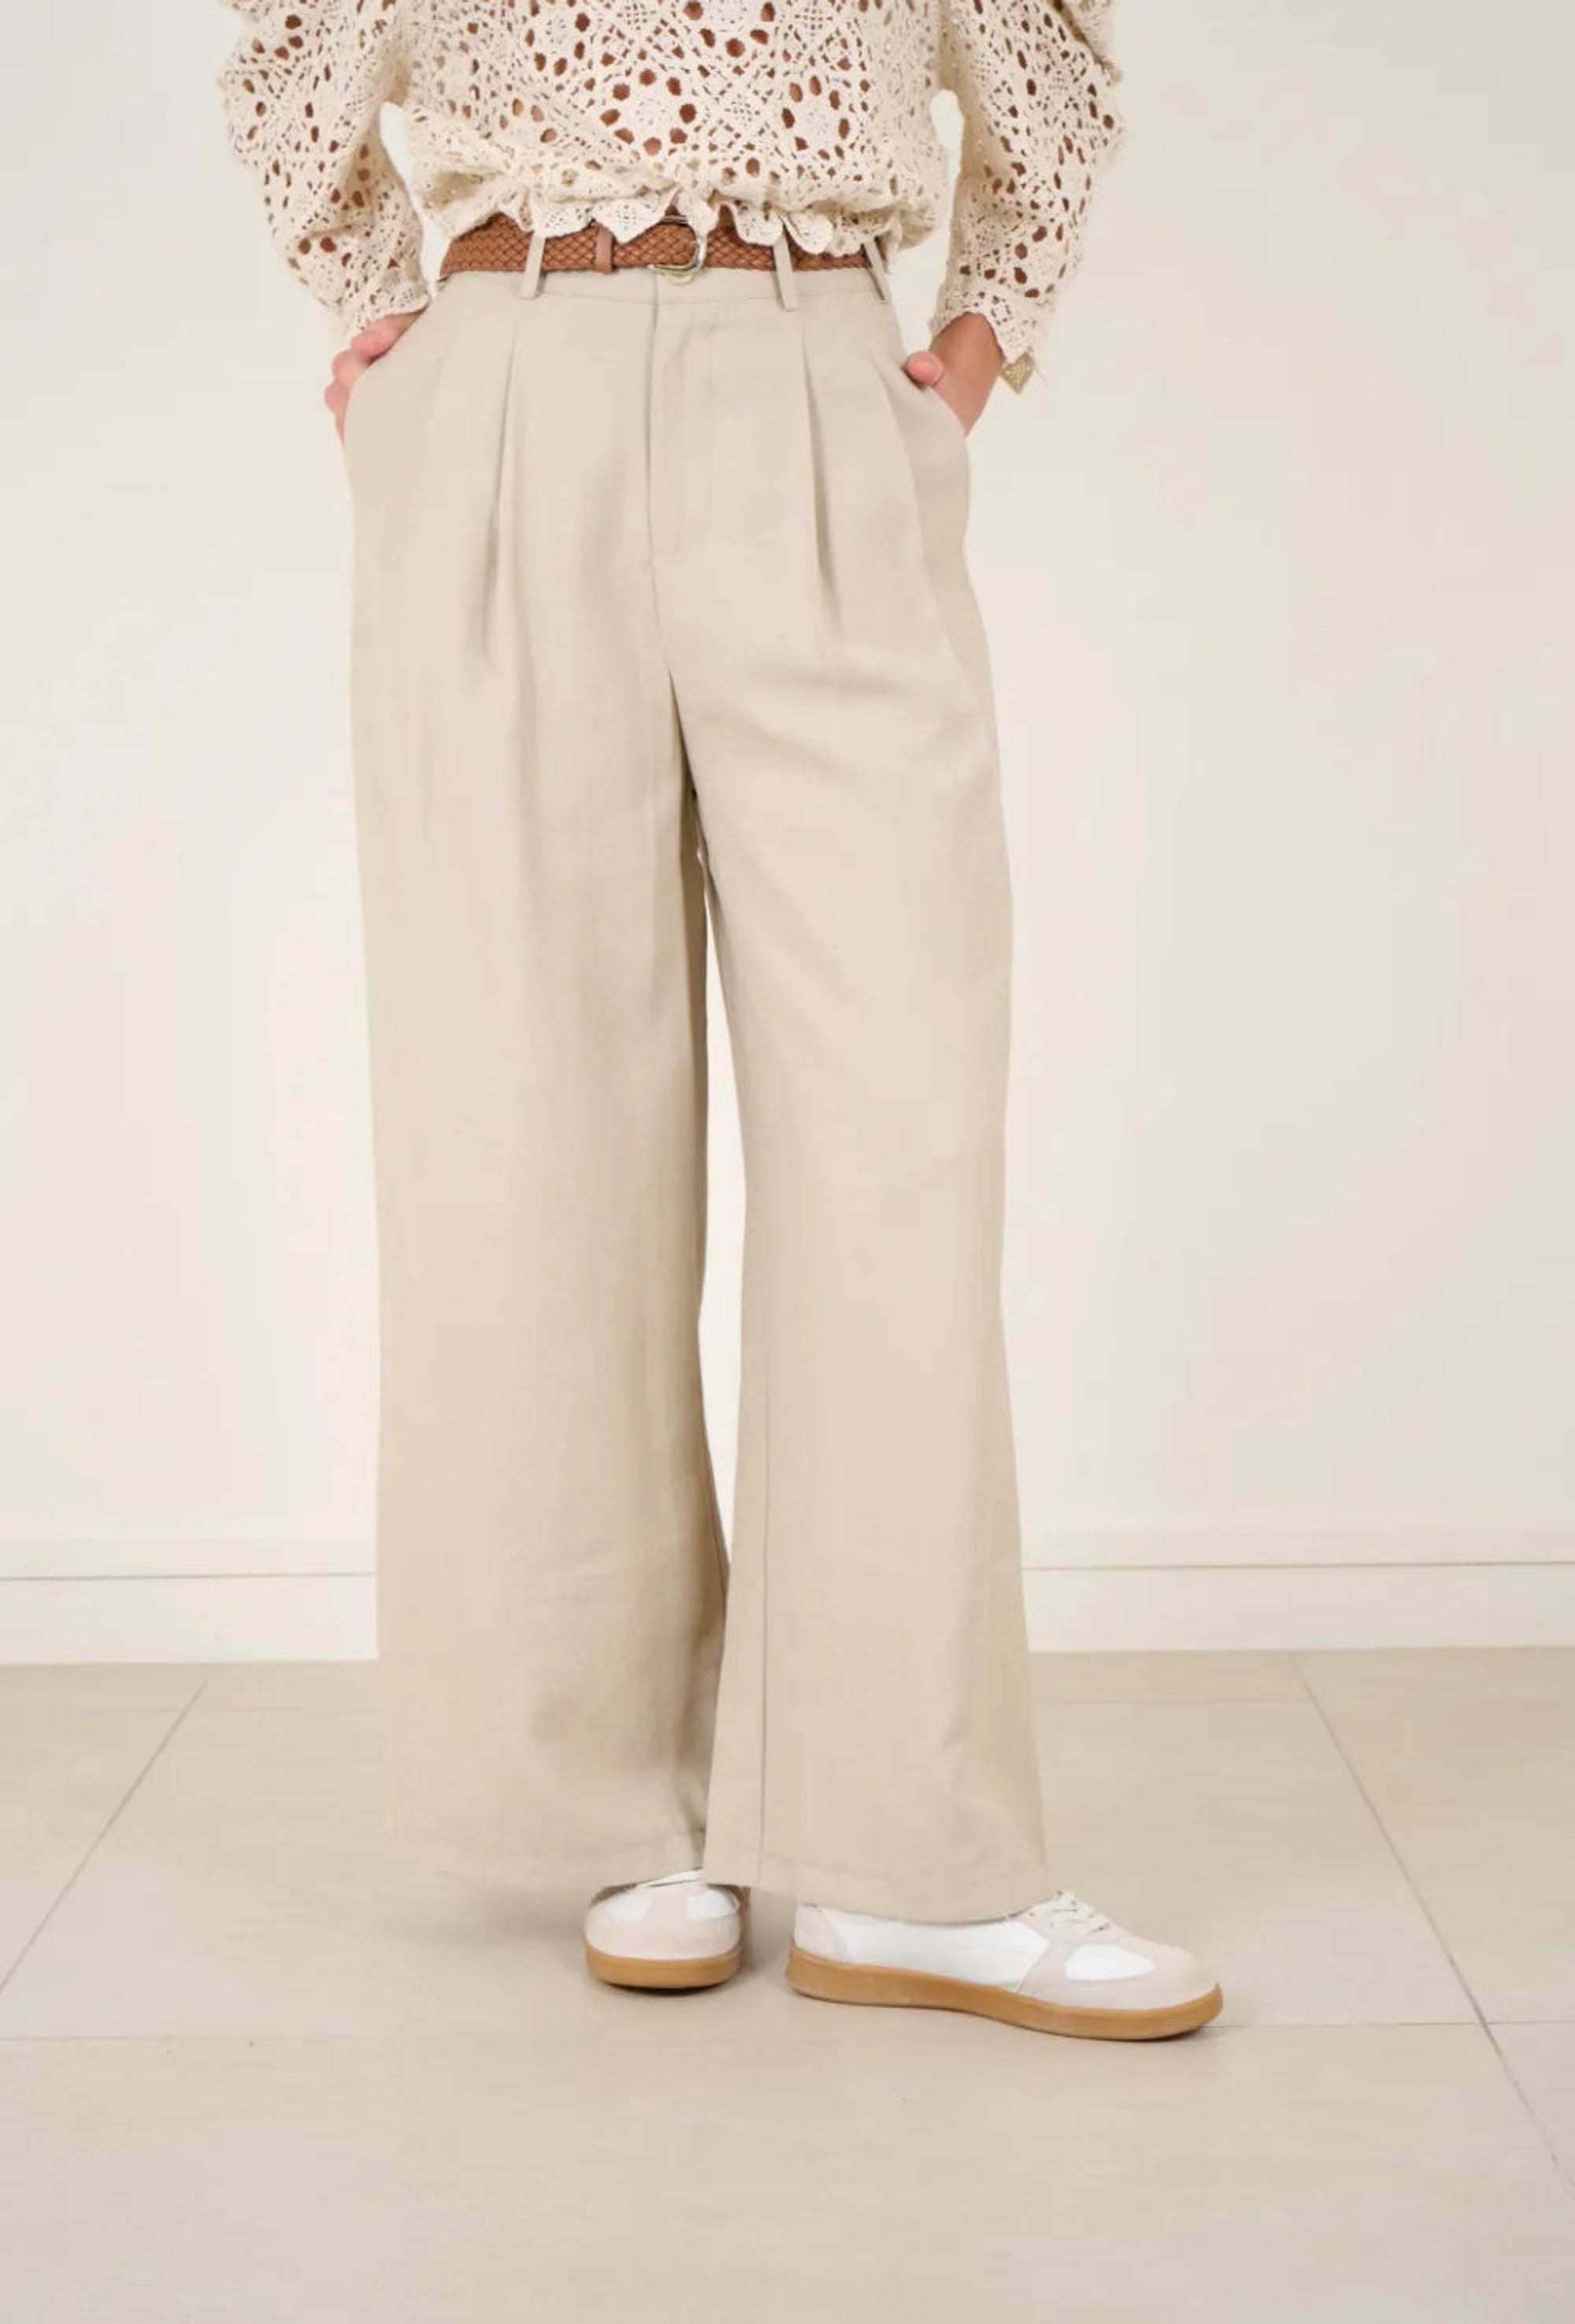 Clever Alice Normandy Pant in Beige 